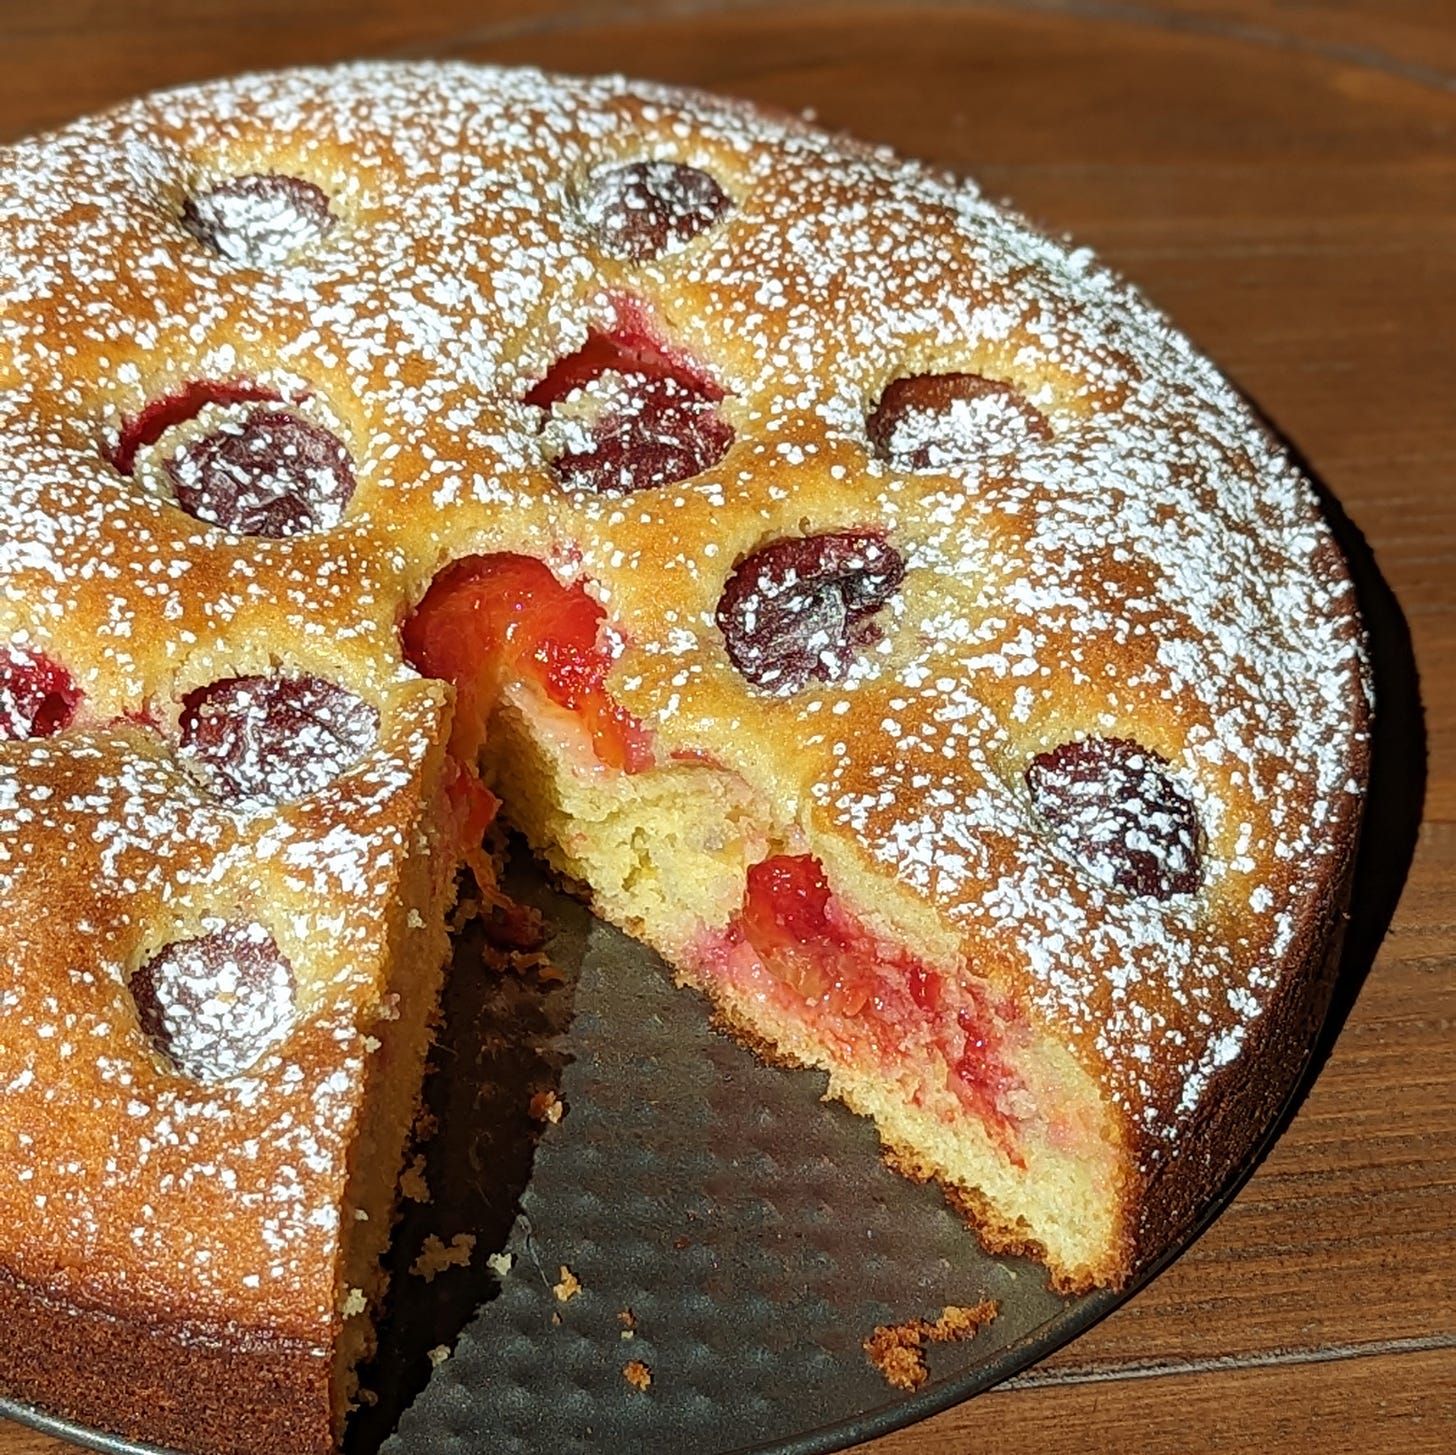 yellow round cake with a slice taken out to show red plums